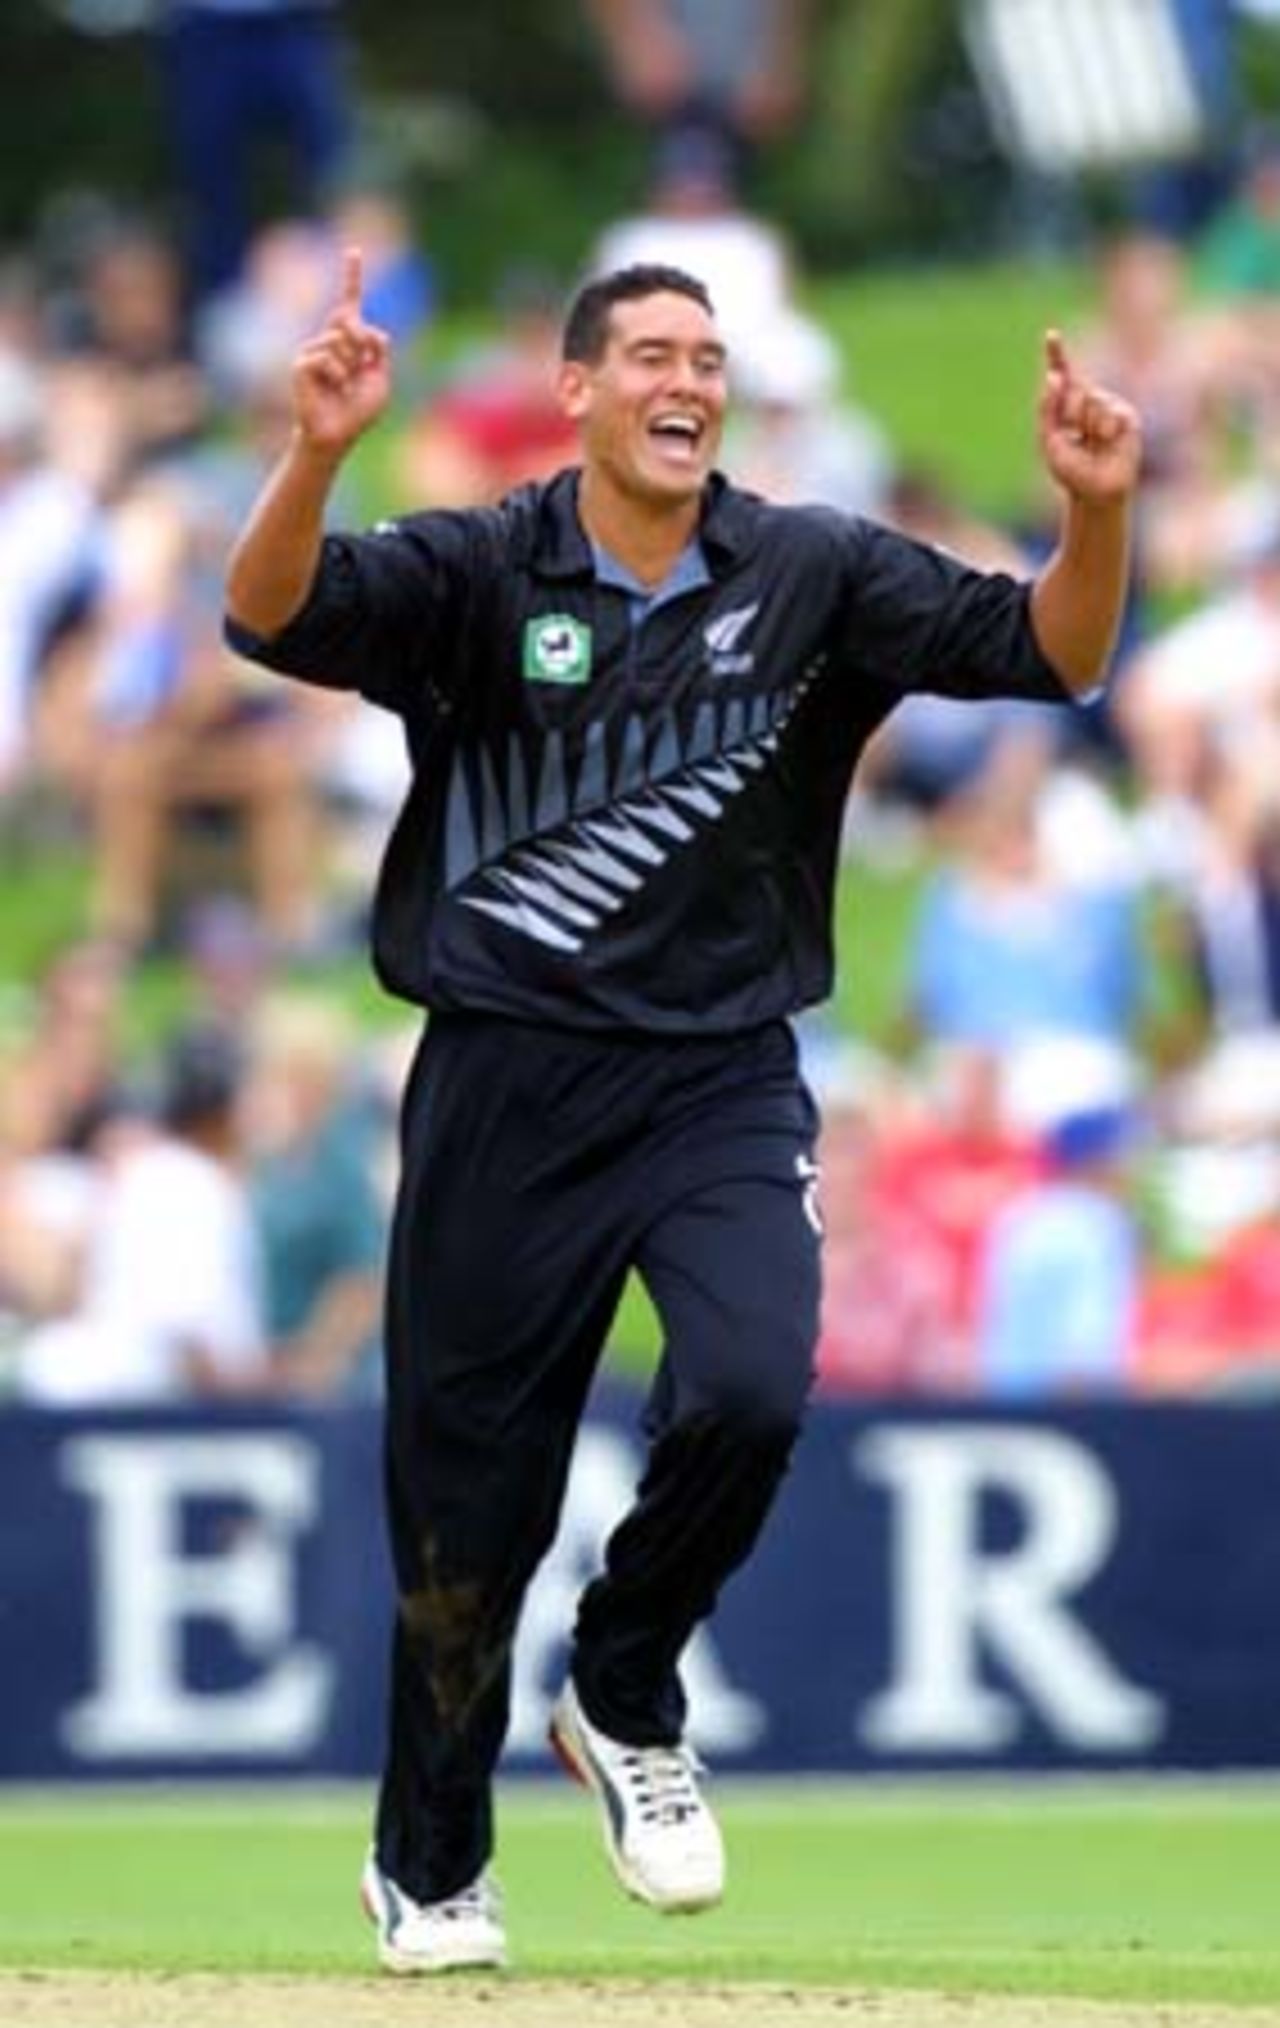 New Zealand fast medium bowler Daryl Tuffey celebrates the dismissal of Pakistan wicket-keeper/batsman Moin Khan, caught at slip by Stephen Fleming for one. 2nd One-Day International: New Zealand v Pakistan at McLean Park, Napier, 20 February 2001.